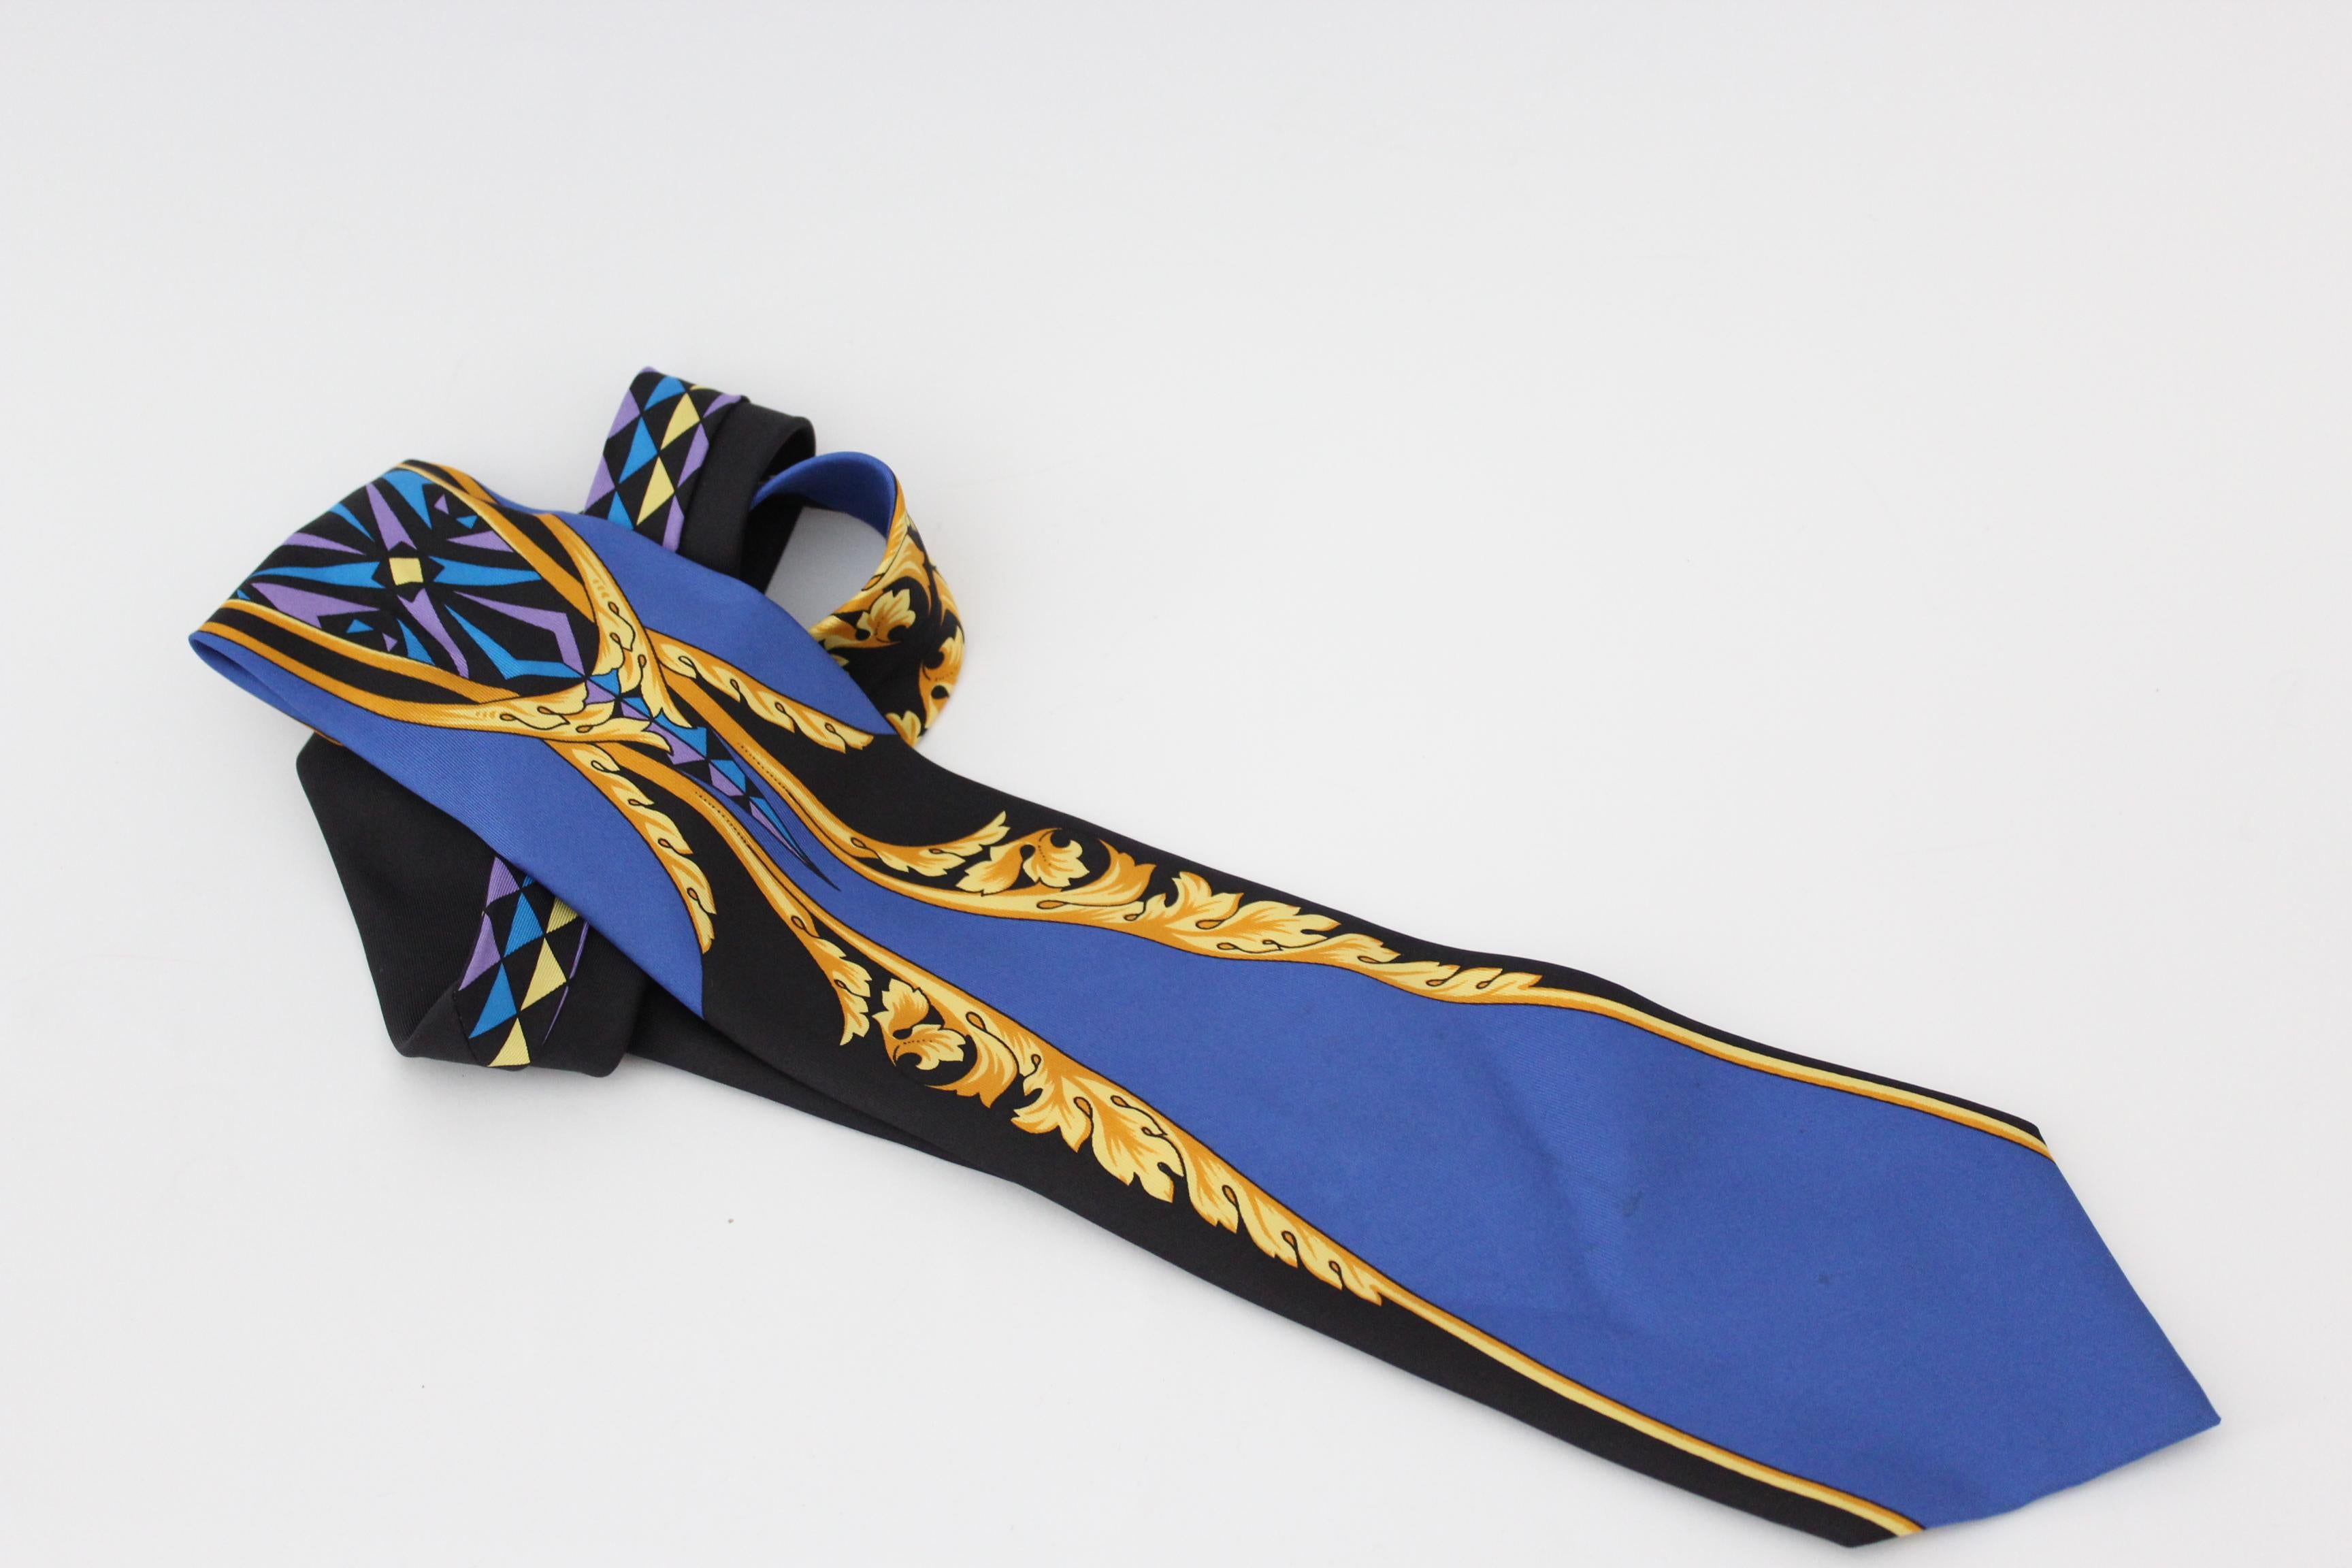 Versus by Gianni Versace vintage 90s tie. Baroque style tie, blue, gold and black. 100% silk. Made in Italy. Very good vintage condition, some small spots.

Length: 144 cm
Width: 10 cm